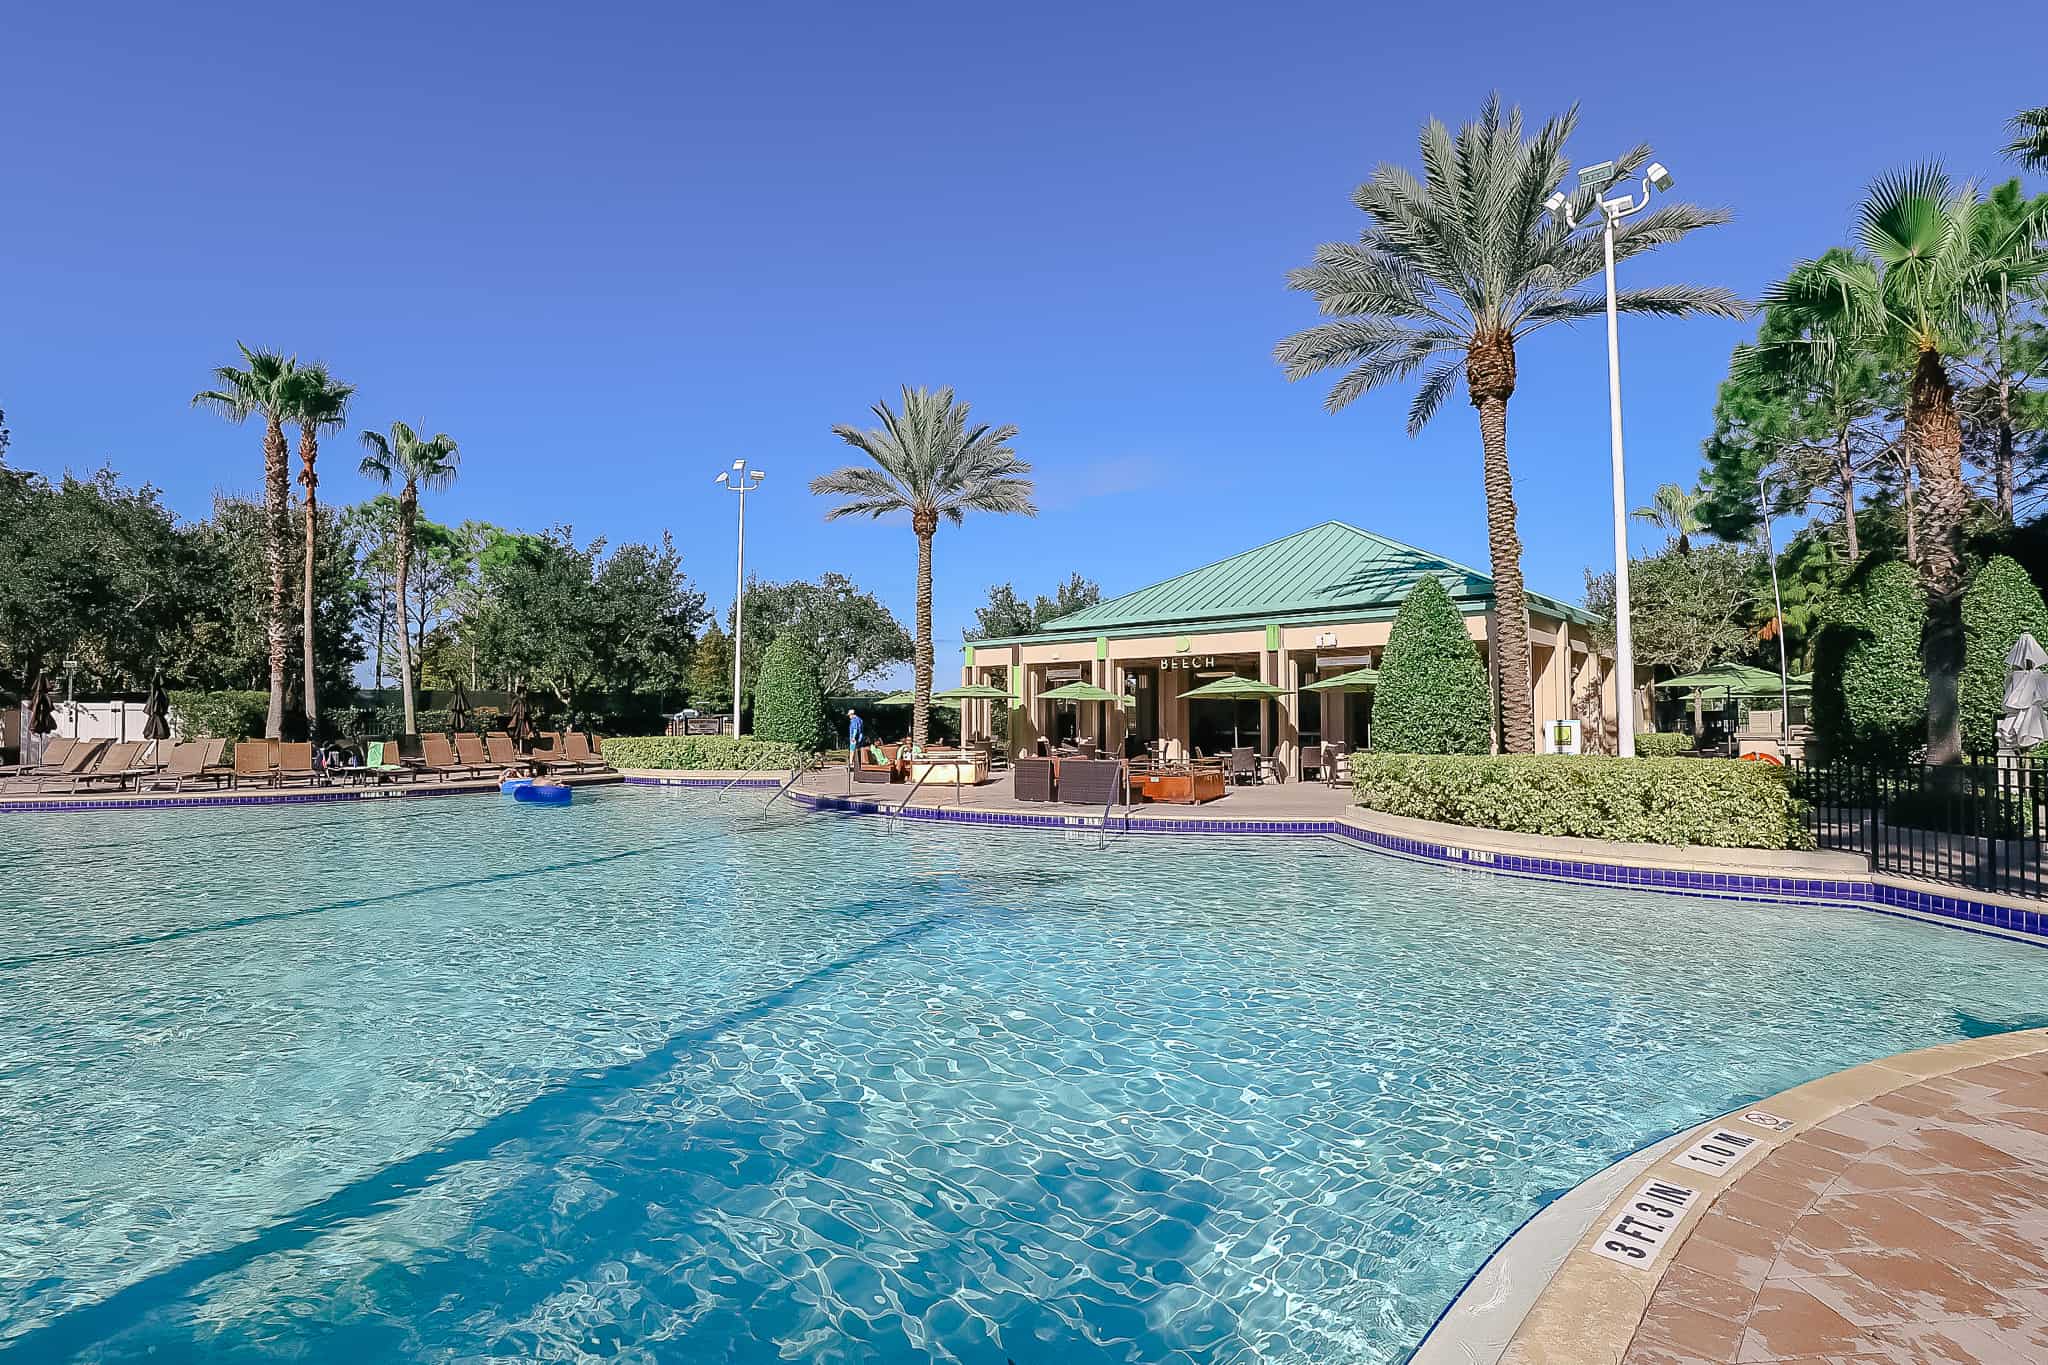 the larger portion of the pool that connects to the lazy river